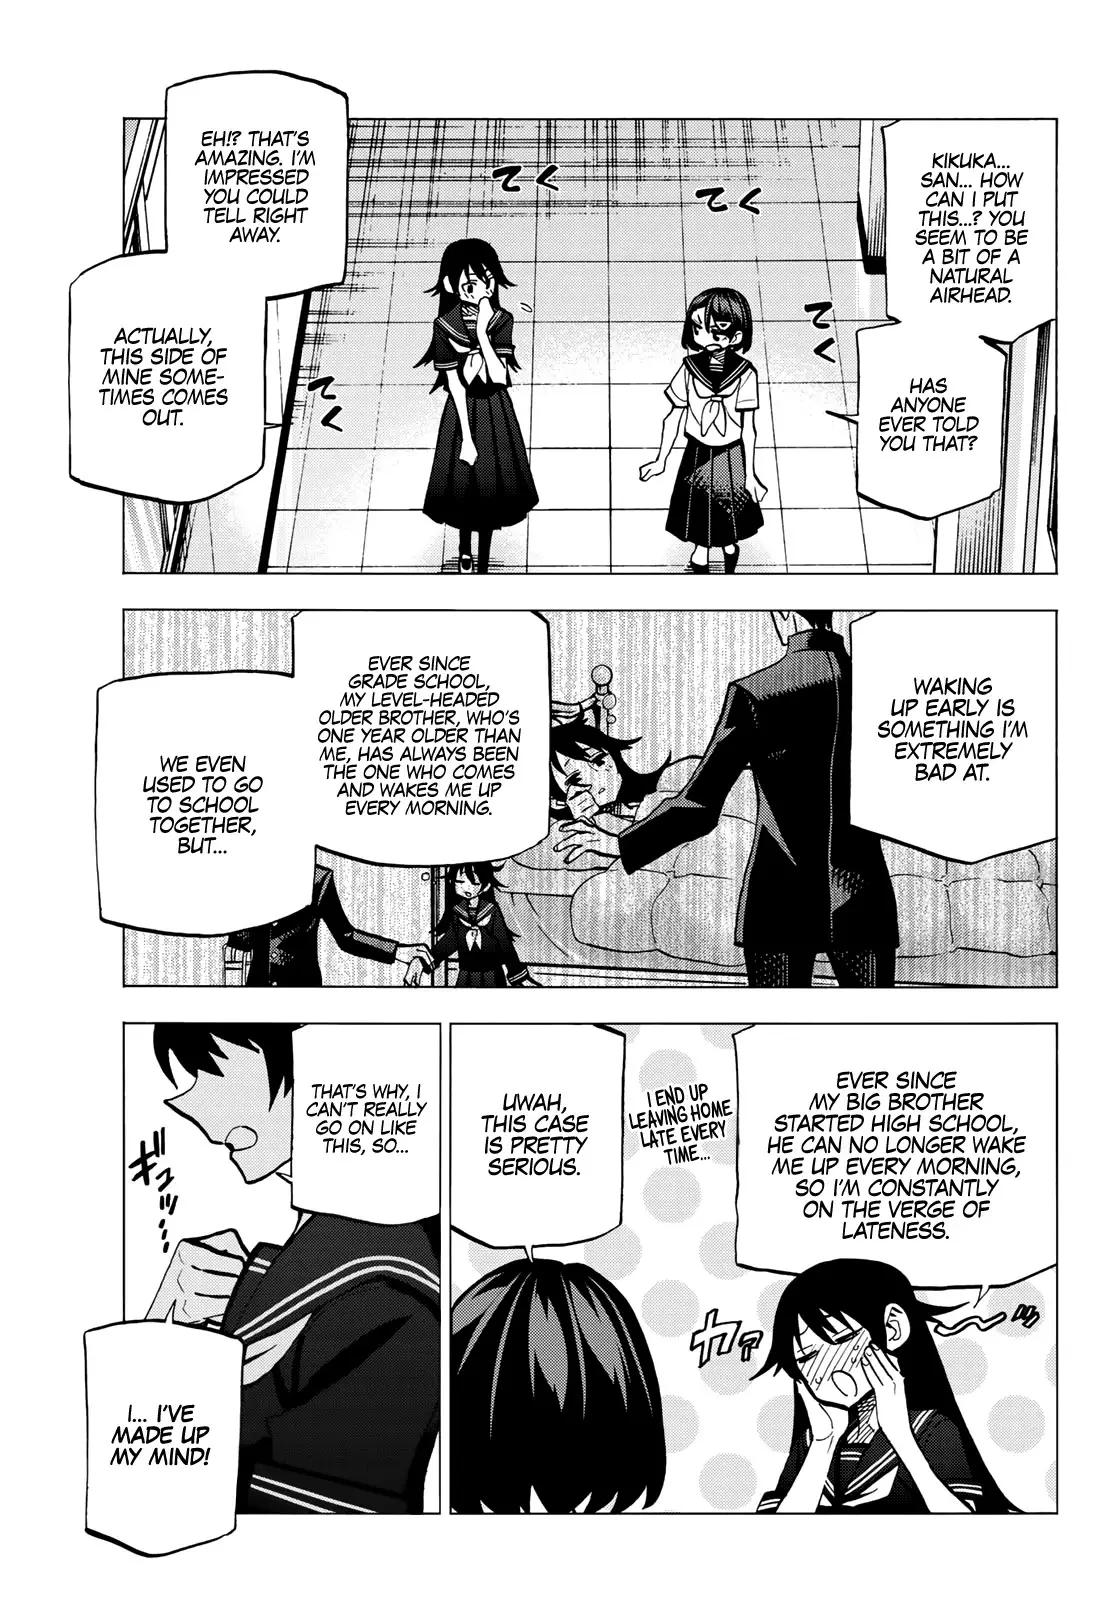 The Story Between A Dumb Prefect And A High School Girl With An Inappropriate Skirt Length - 11 page 8